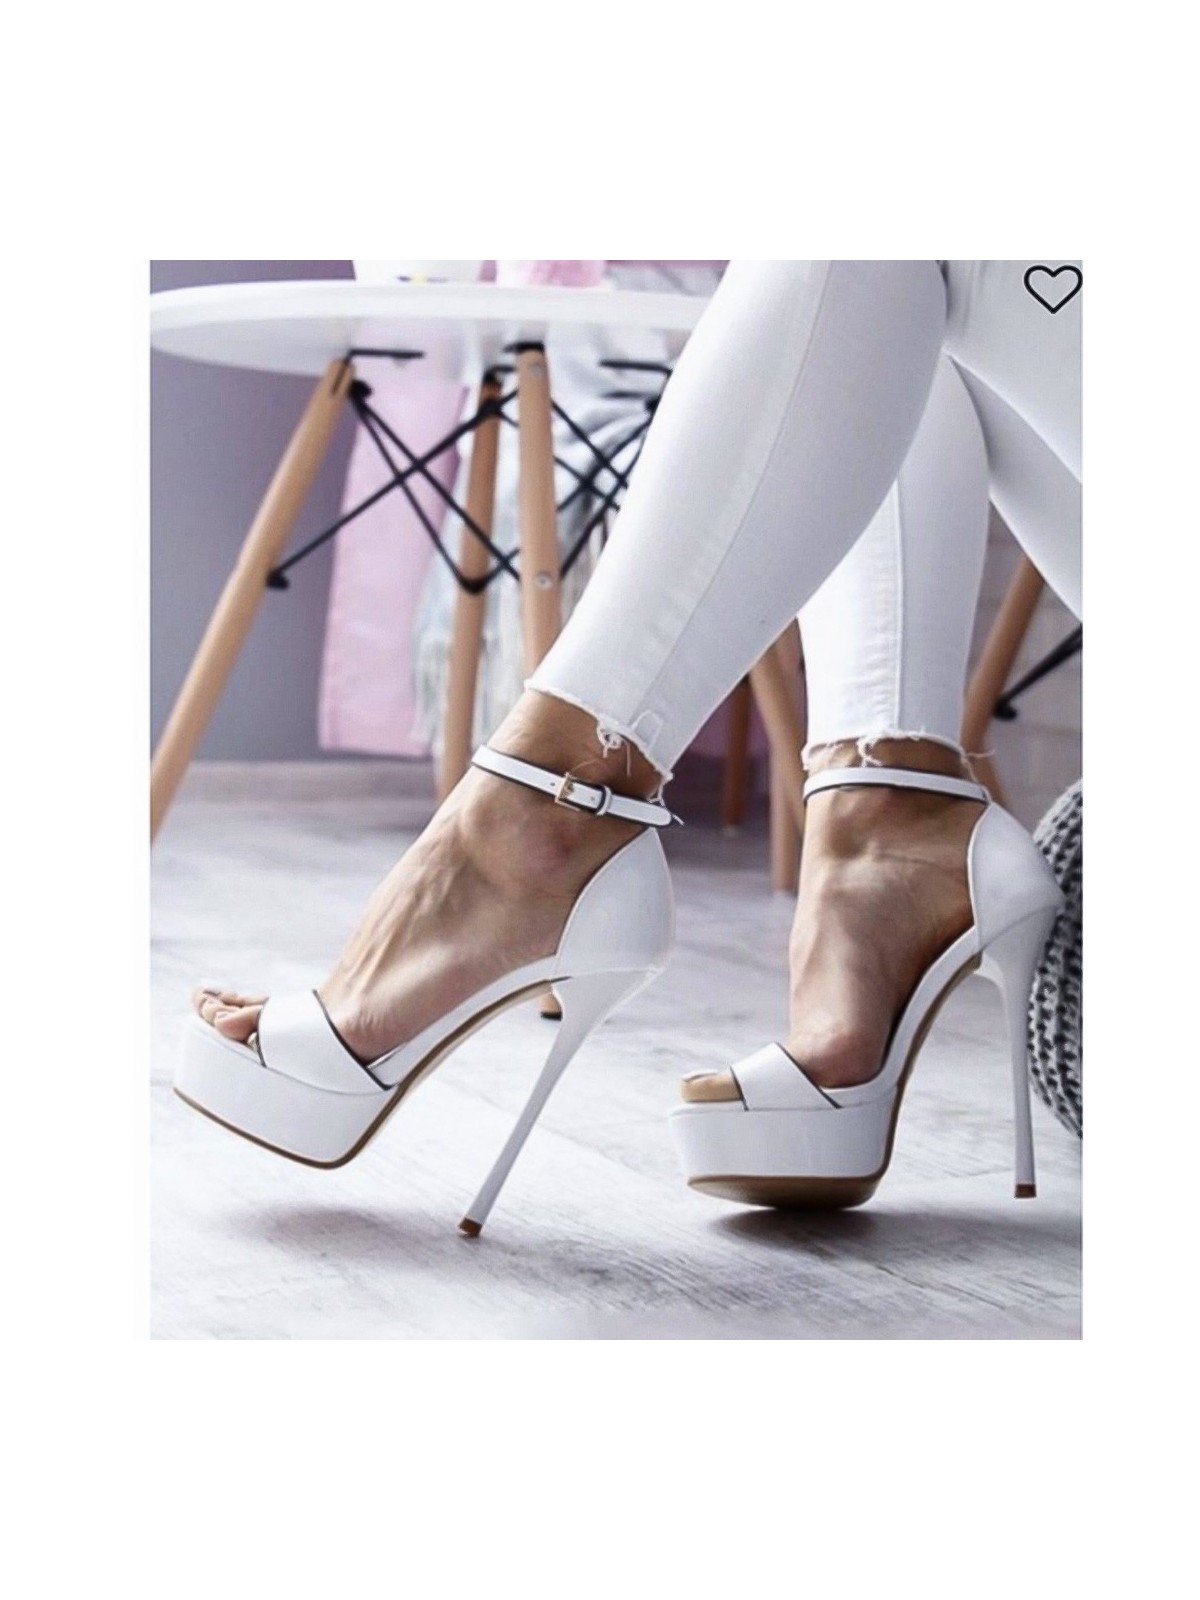 WHITE PATENT LEATHER SANDAL WITH HIGH HEEL